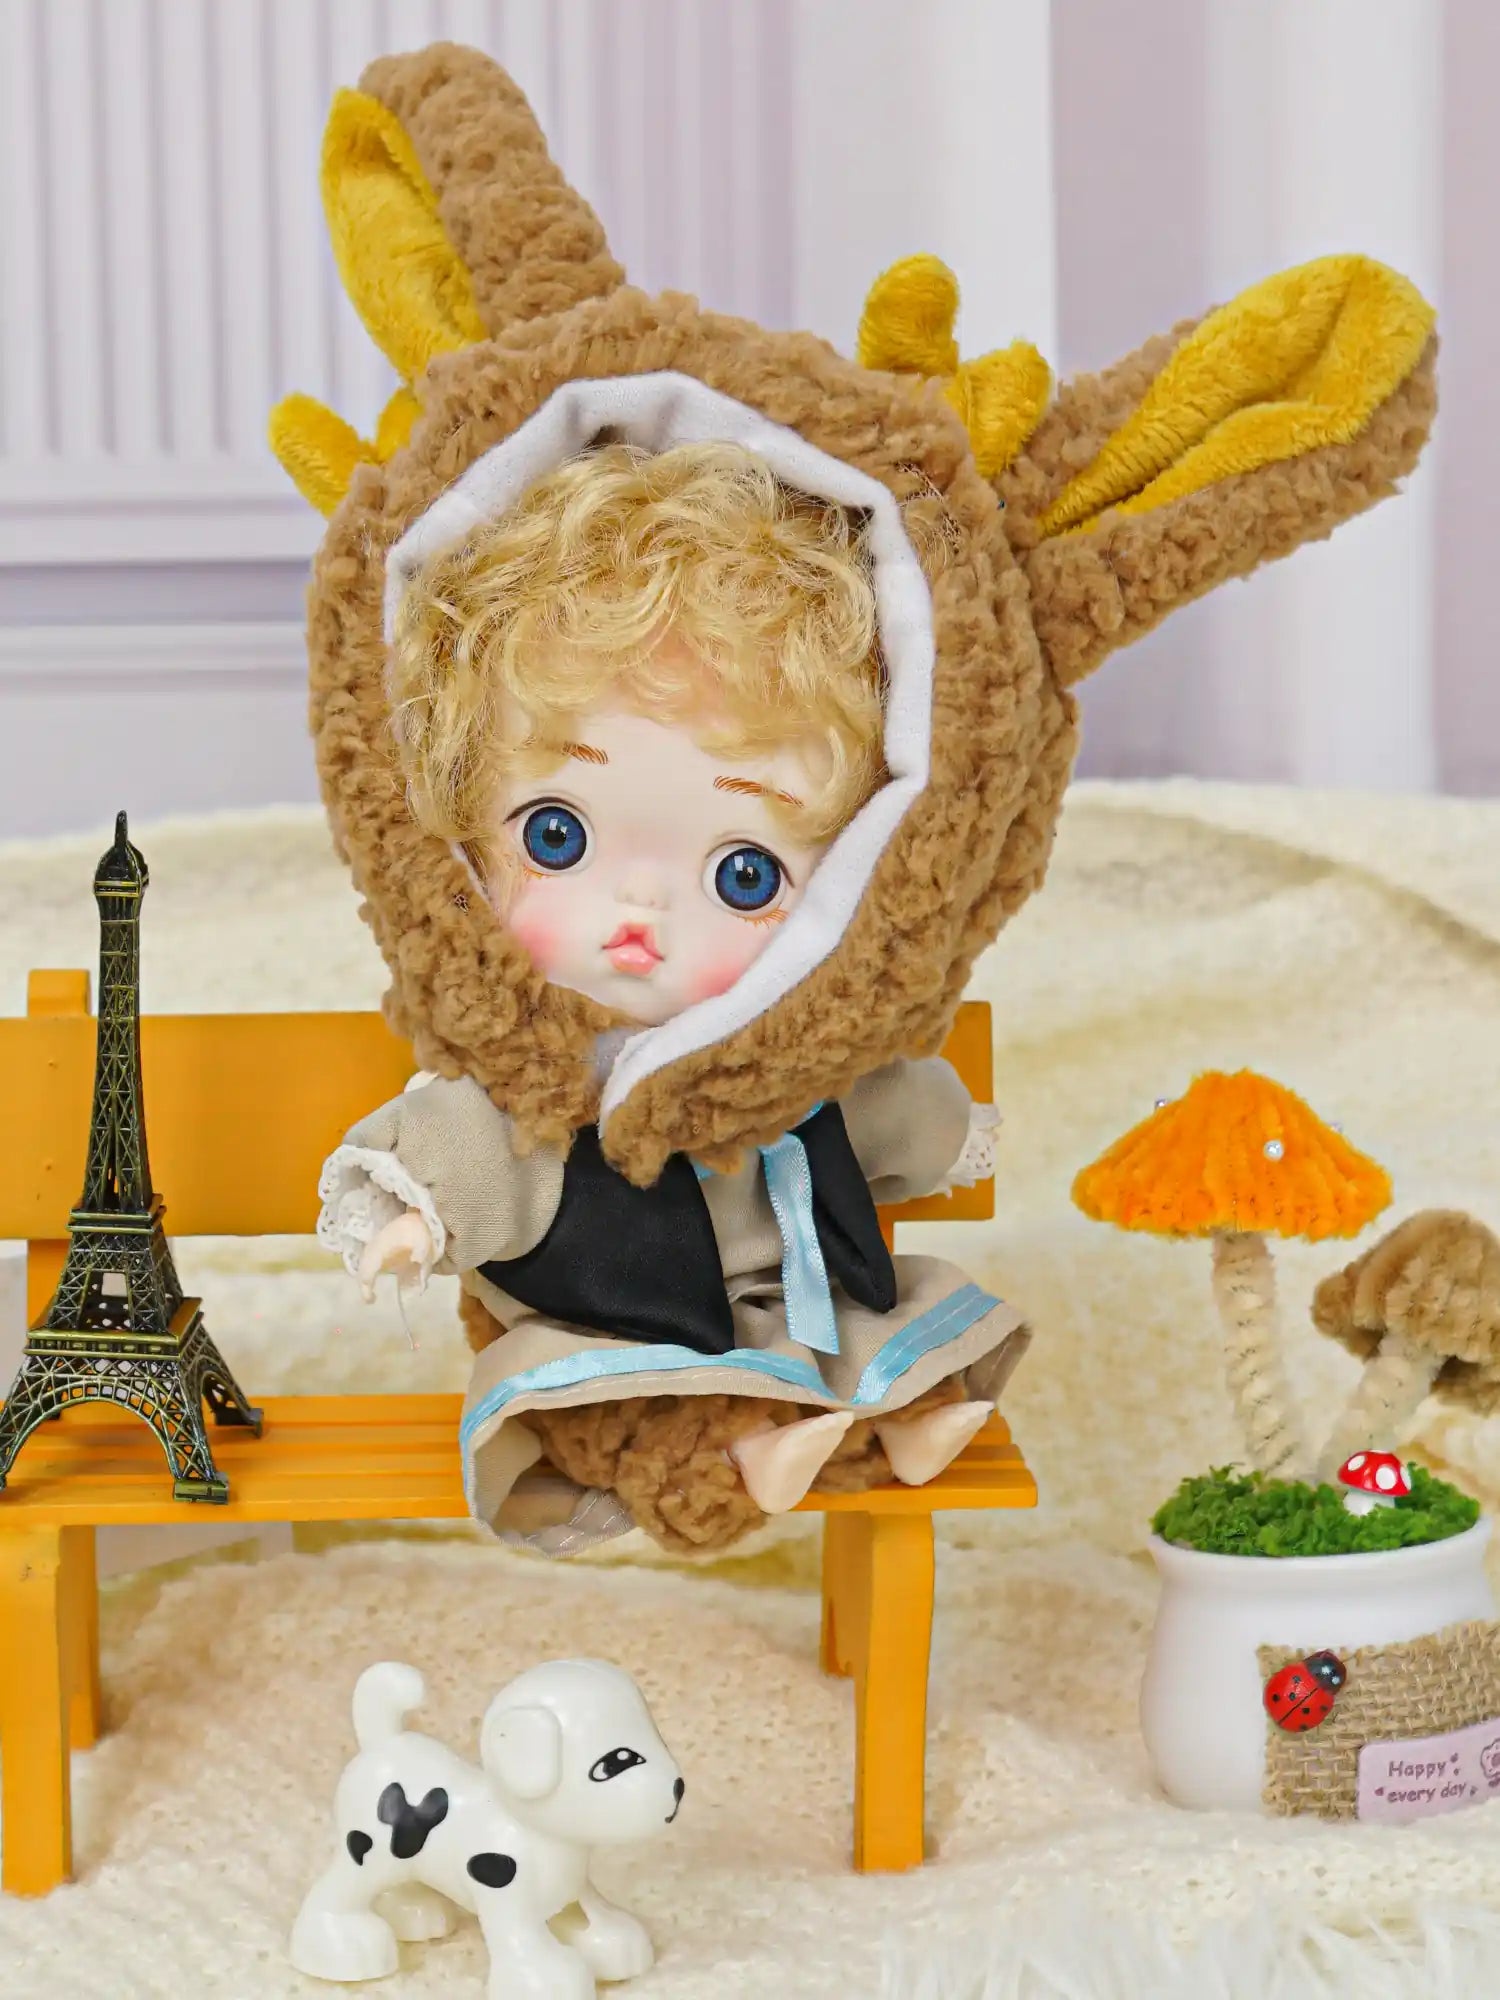 A blue-eyed doll with rabbit ears, posed with a small Eiffel Tower model and a toy canine on a plush background.